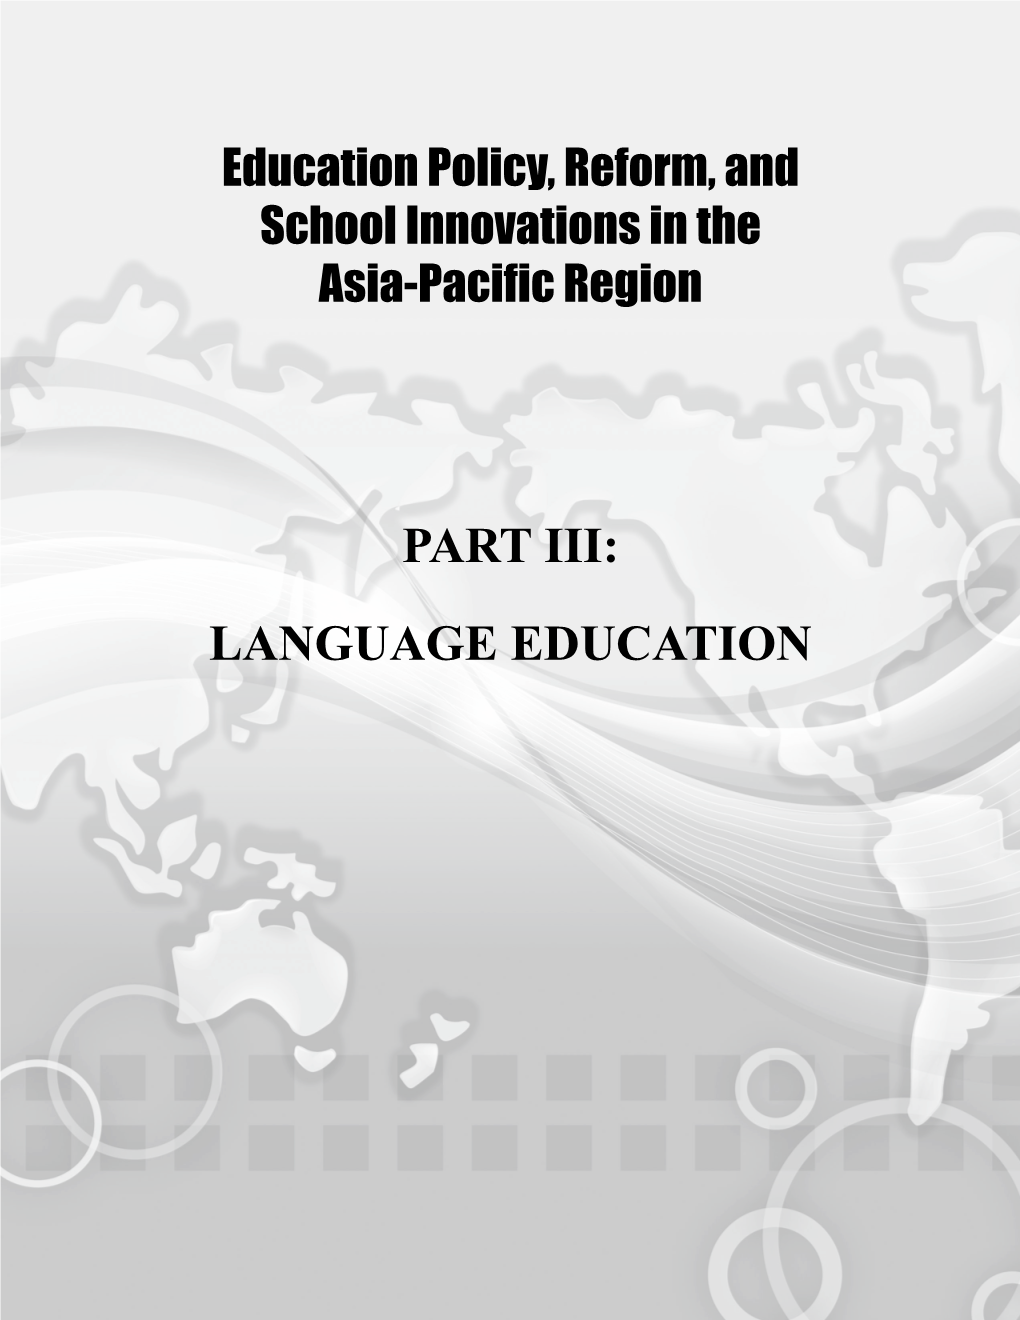 LANGUAGE EDUCATION ~ 328 ~ Turning from Teaching in English to Teaching in Mother Tongue: Social Realities and Contradictions in Post-1997 Hong Kong